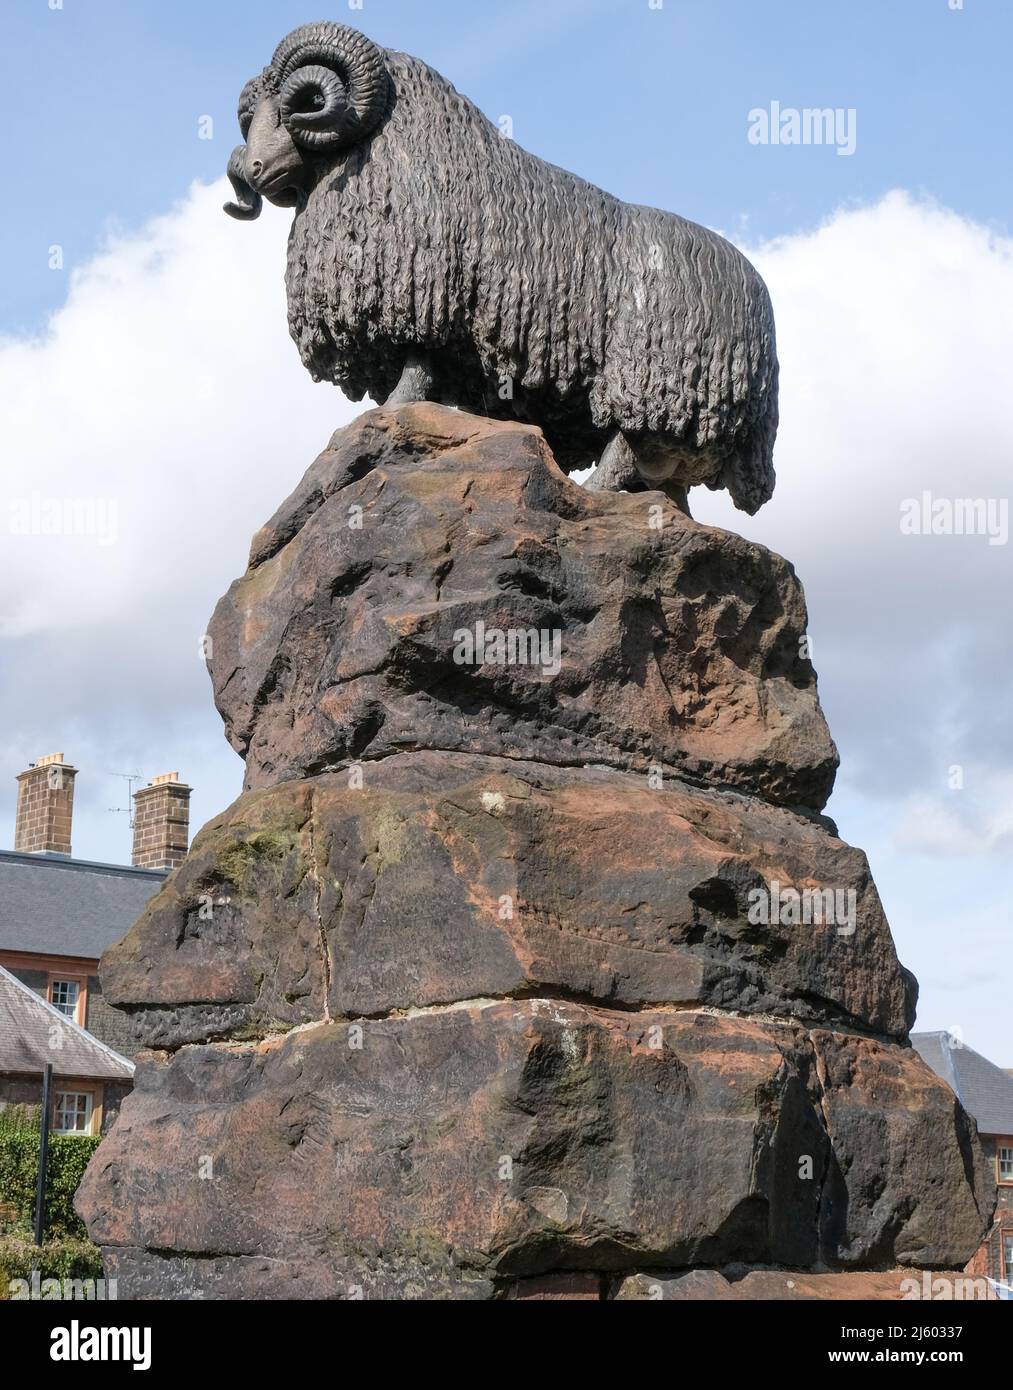 A statue of a ram in the Scottish market town of Moffat, celebrating the town's former importance in the wool trade. Stock Photo